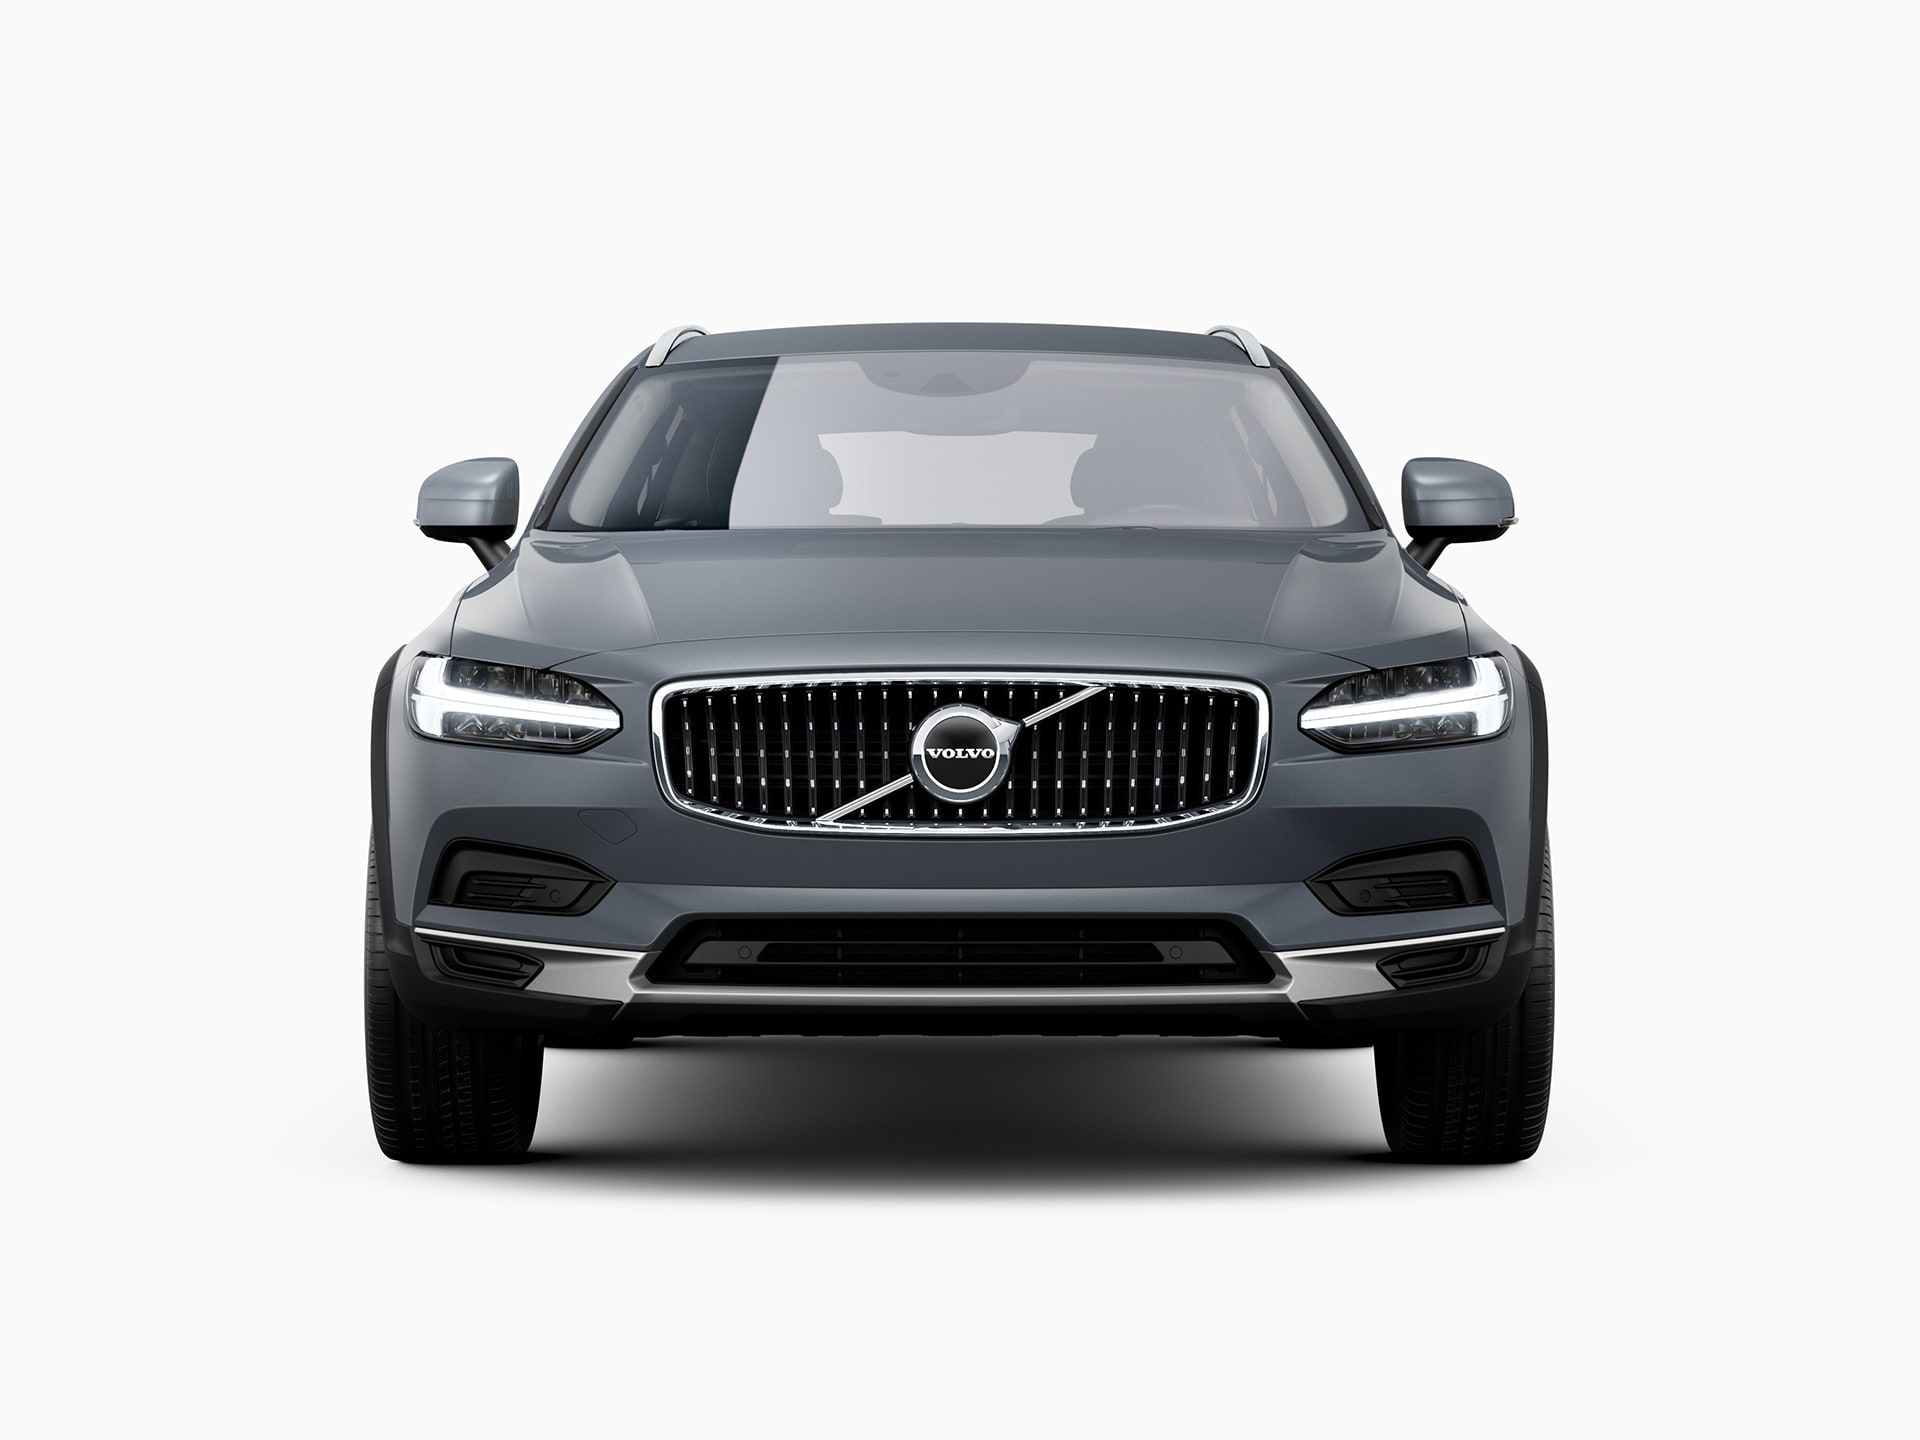 The front of a Volvo V90 Cross Country.